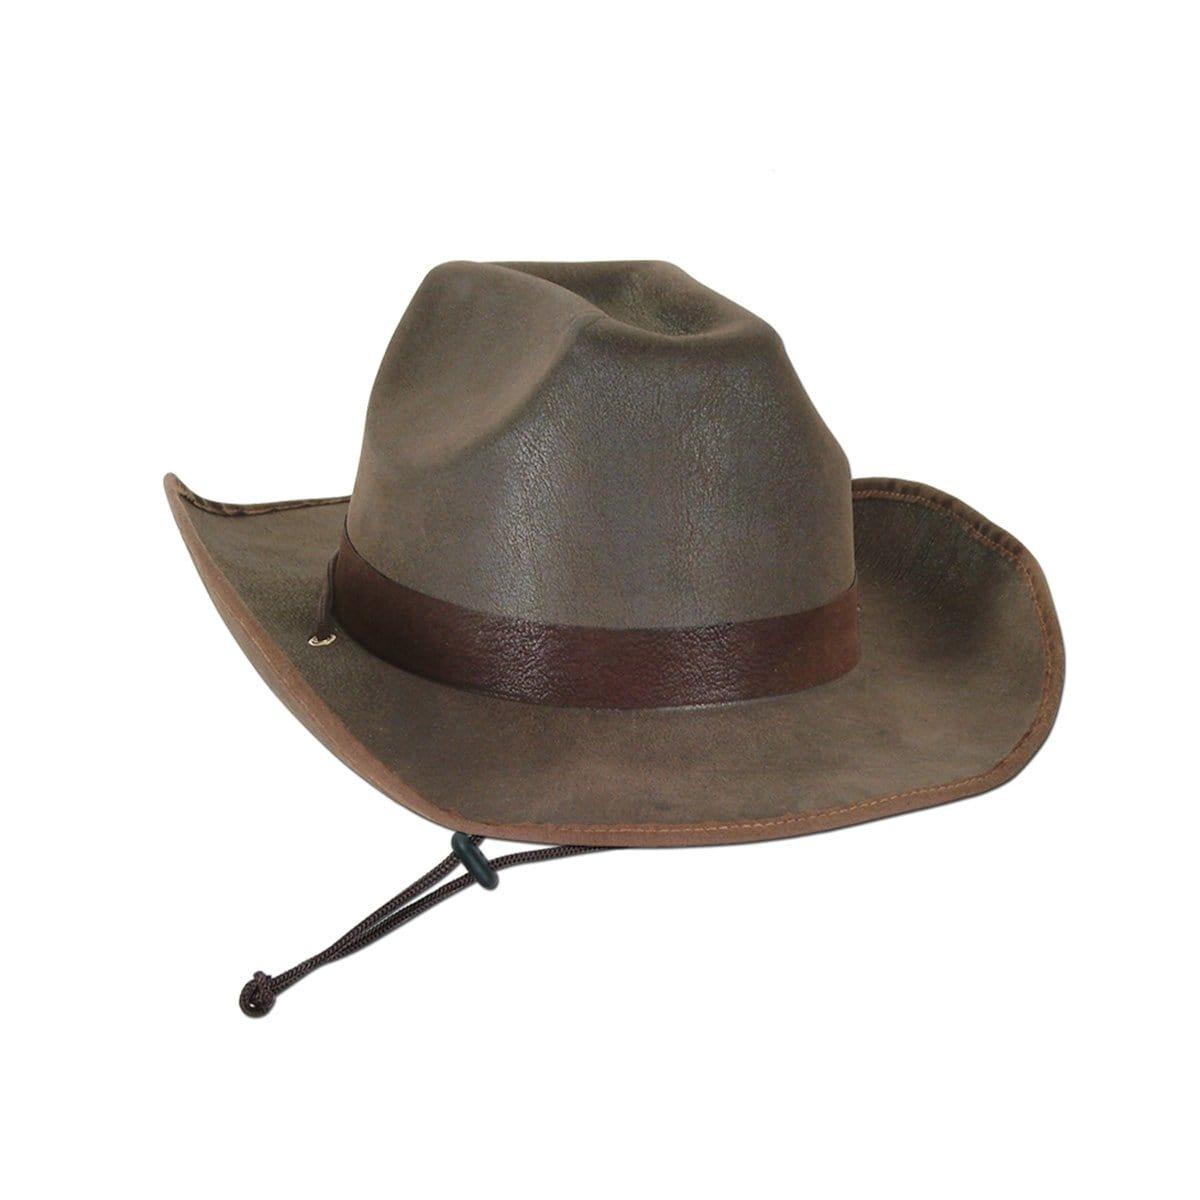 Buy Costume Accessories Brown faux leather western cowboy hat sold at Party Expert